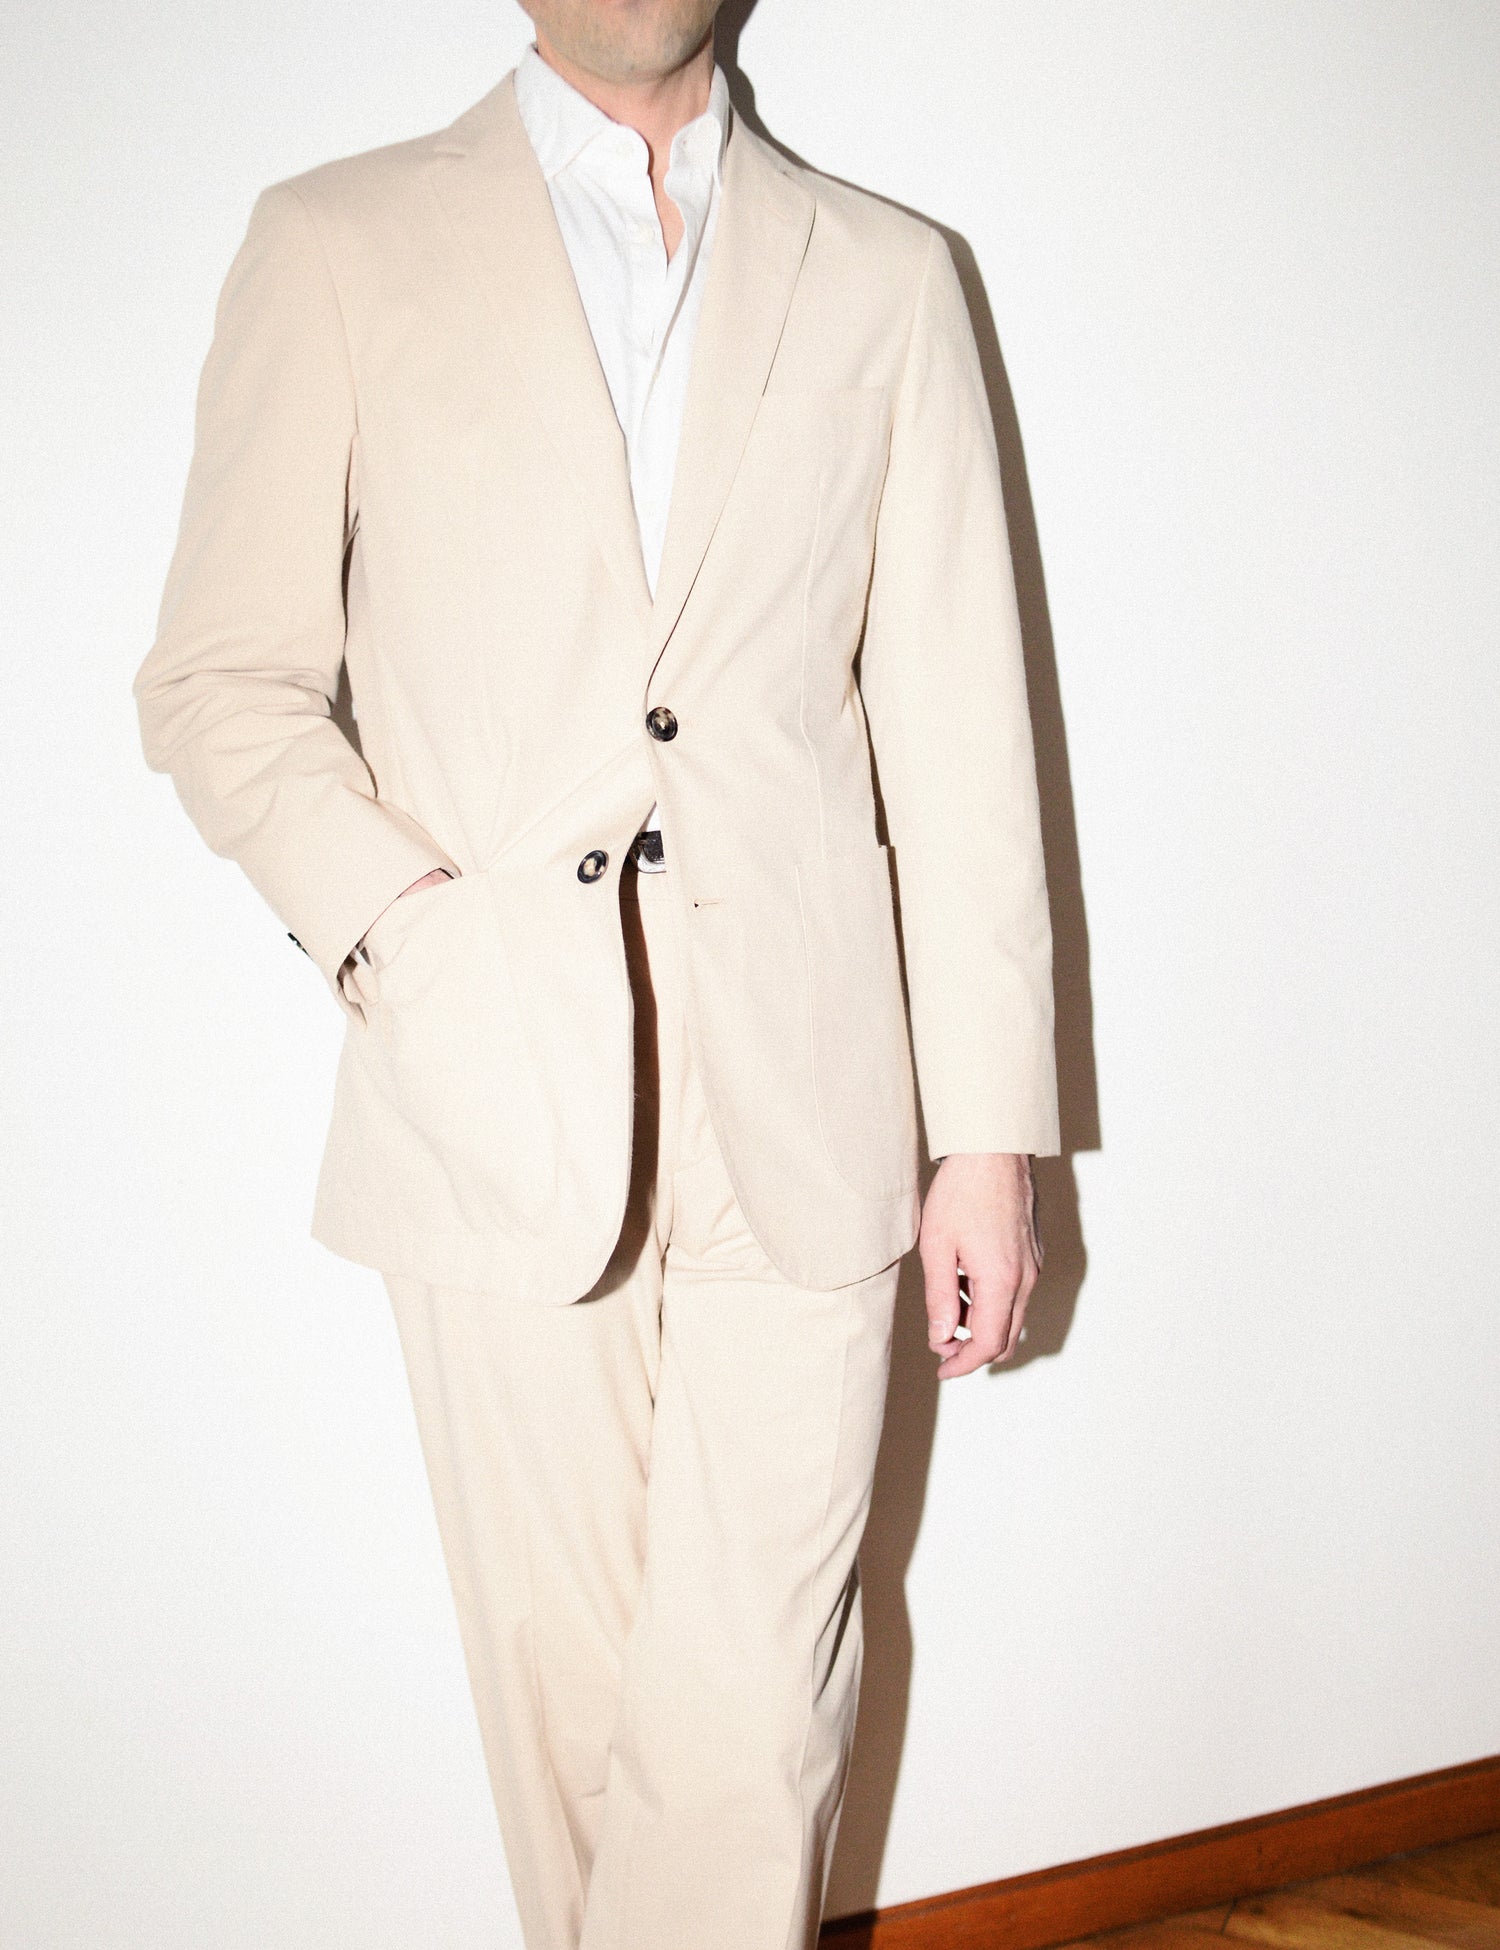 Brooklyn Tailors BKT36 Straight Leg Pant in Crisp Cotton Blend - Desert Sand on-body shot. Model is wearing the pants with a matching jacket and white dress shirt